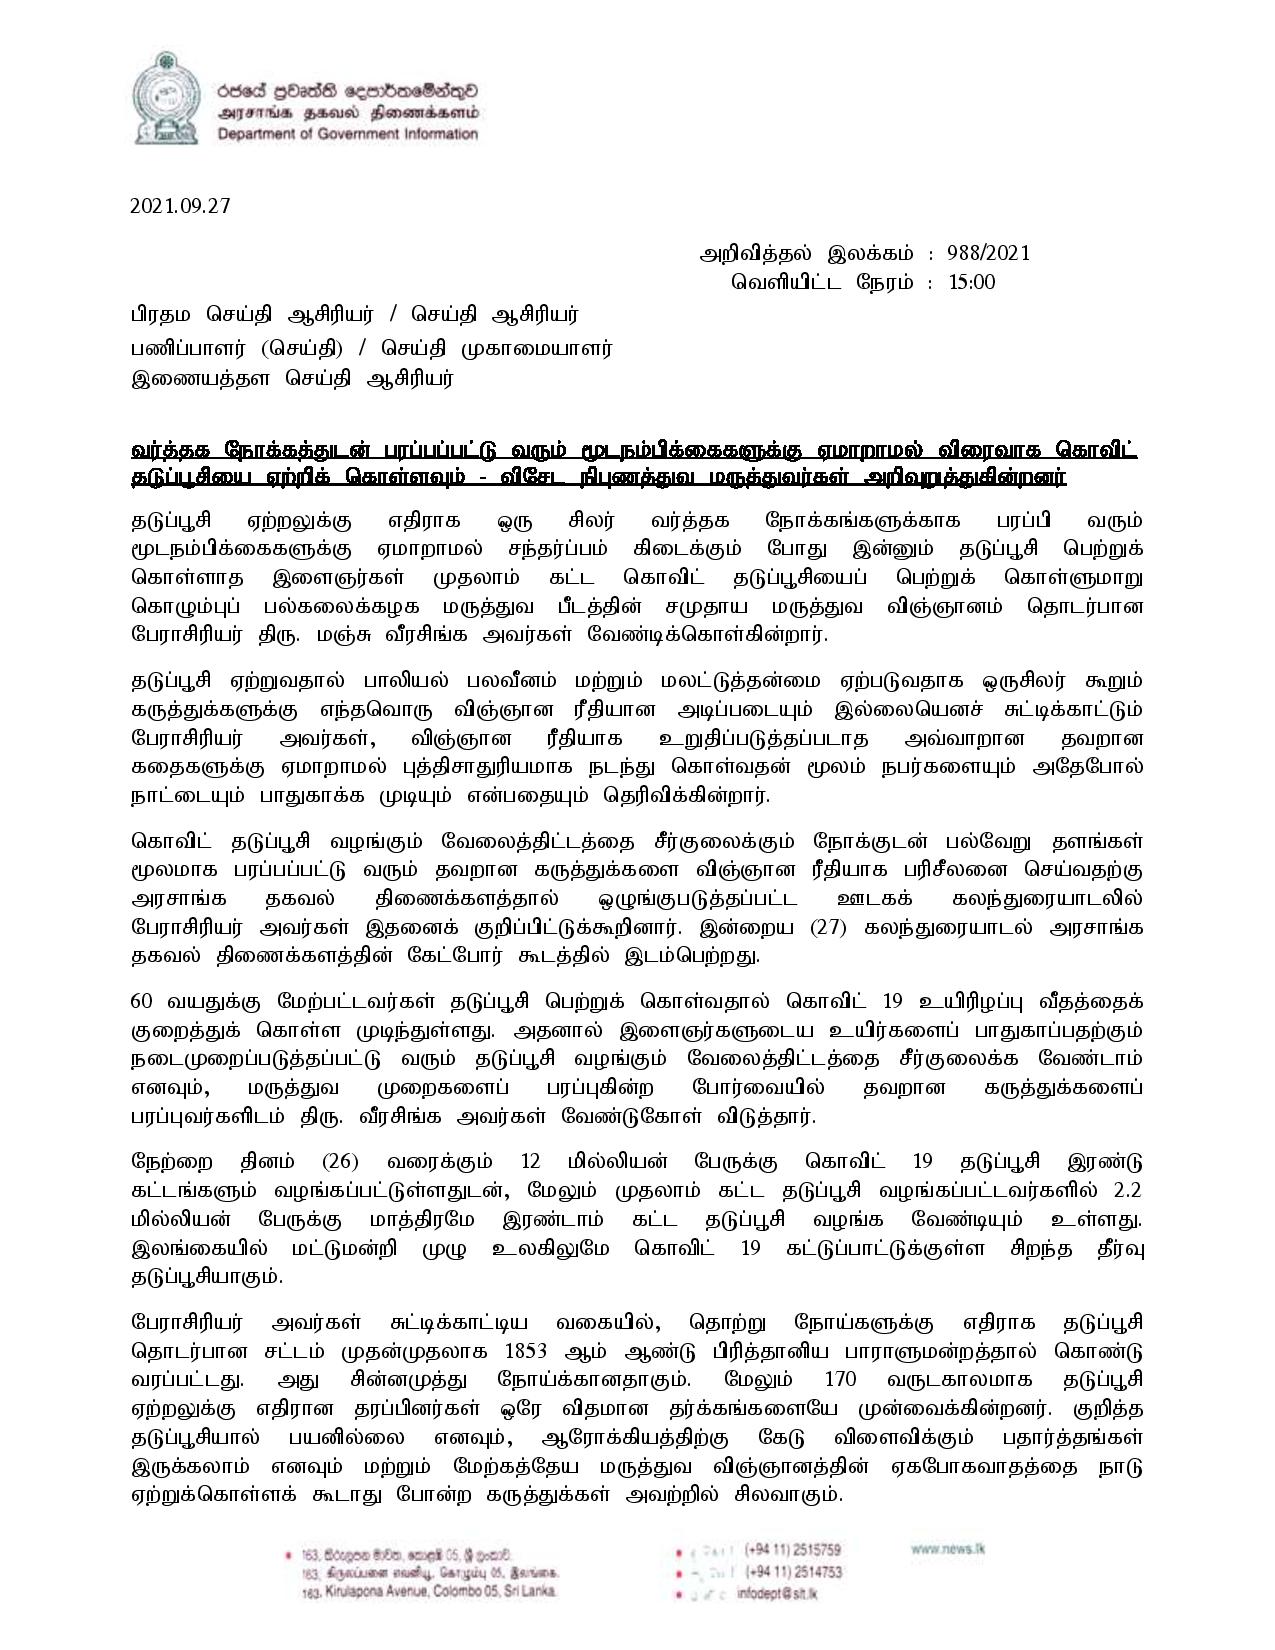 Press Release 988 Tamil. page 001